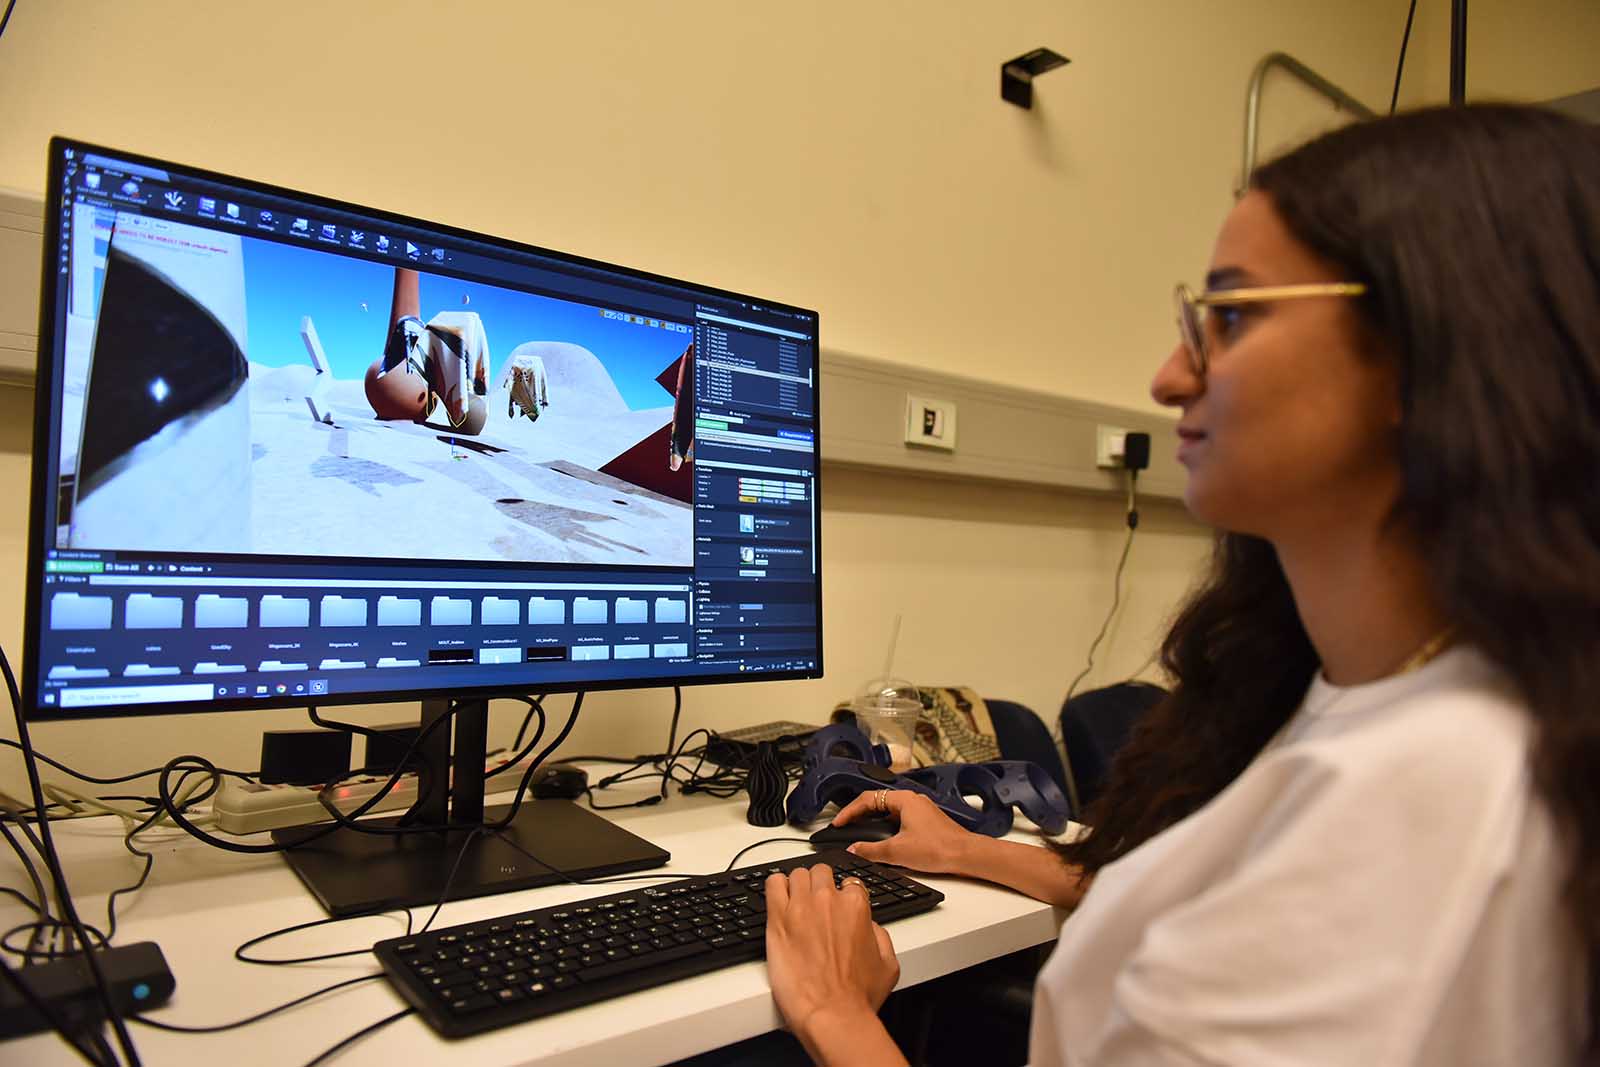 female student using a computer and creating graphics with software